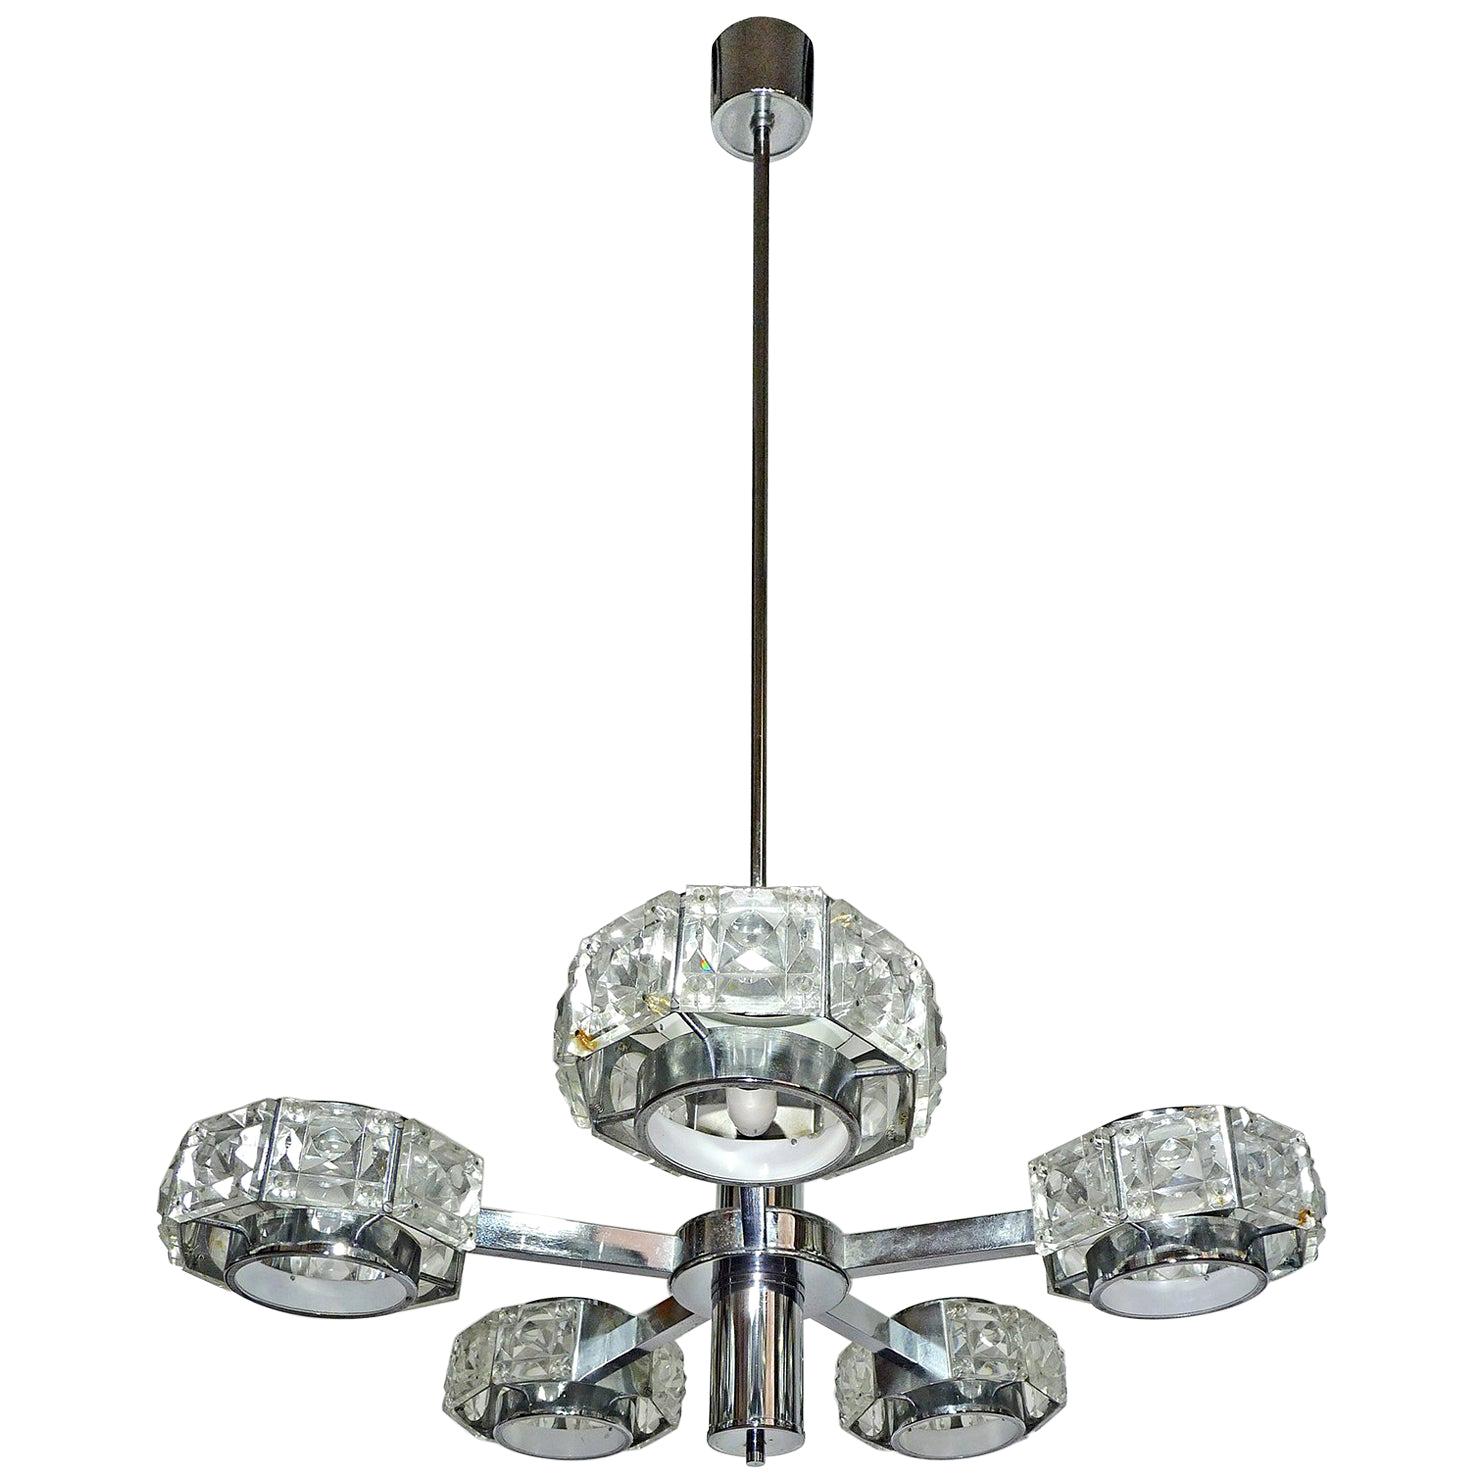 Original sculptural vintage Gaetano Sciolari chrome chandelier. 5-light textured faceted crystal glass diffusers on chrome frame. Made in Italy in the 1970s.
Measures: 
Diameter 30 in / 76 cm
Height 45 in / 115 cm
Weight 16 lb/ 7 Kg
5 light bulbs